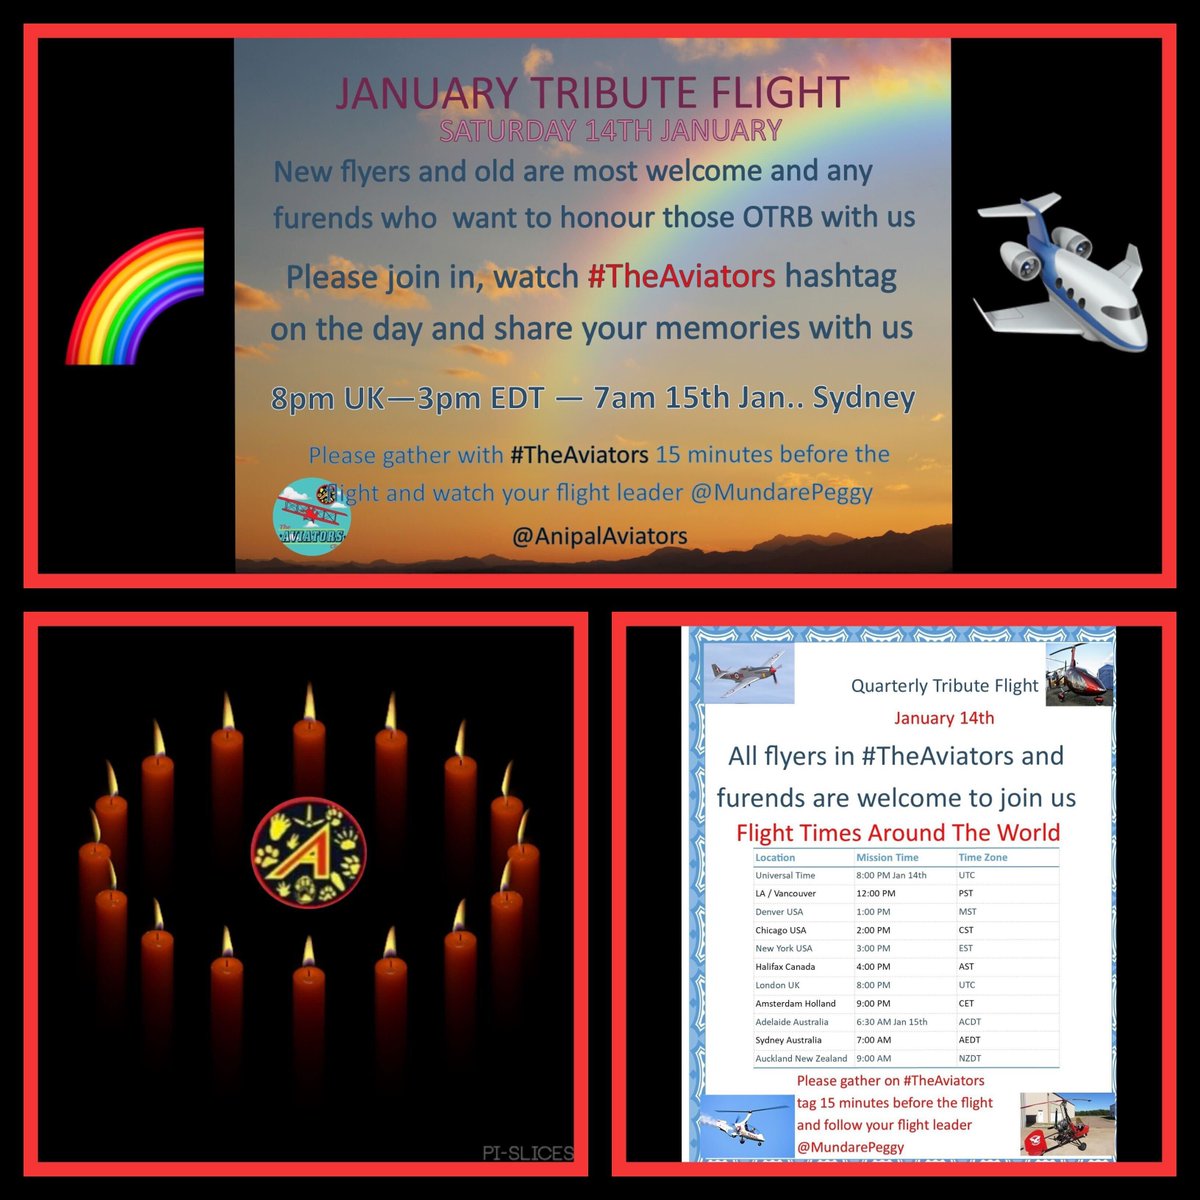 #Hedgewatch #theruffriderz #ZSHQ
#CatsOfTwitter #DogsOfTwitter 

🌈🛩️Feel welcome to join #TheAviators during our Quarterly Tribute Flight todaytonight. To honor and remember. 🛩️🌈